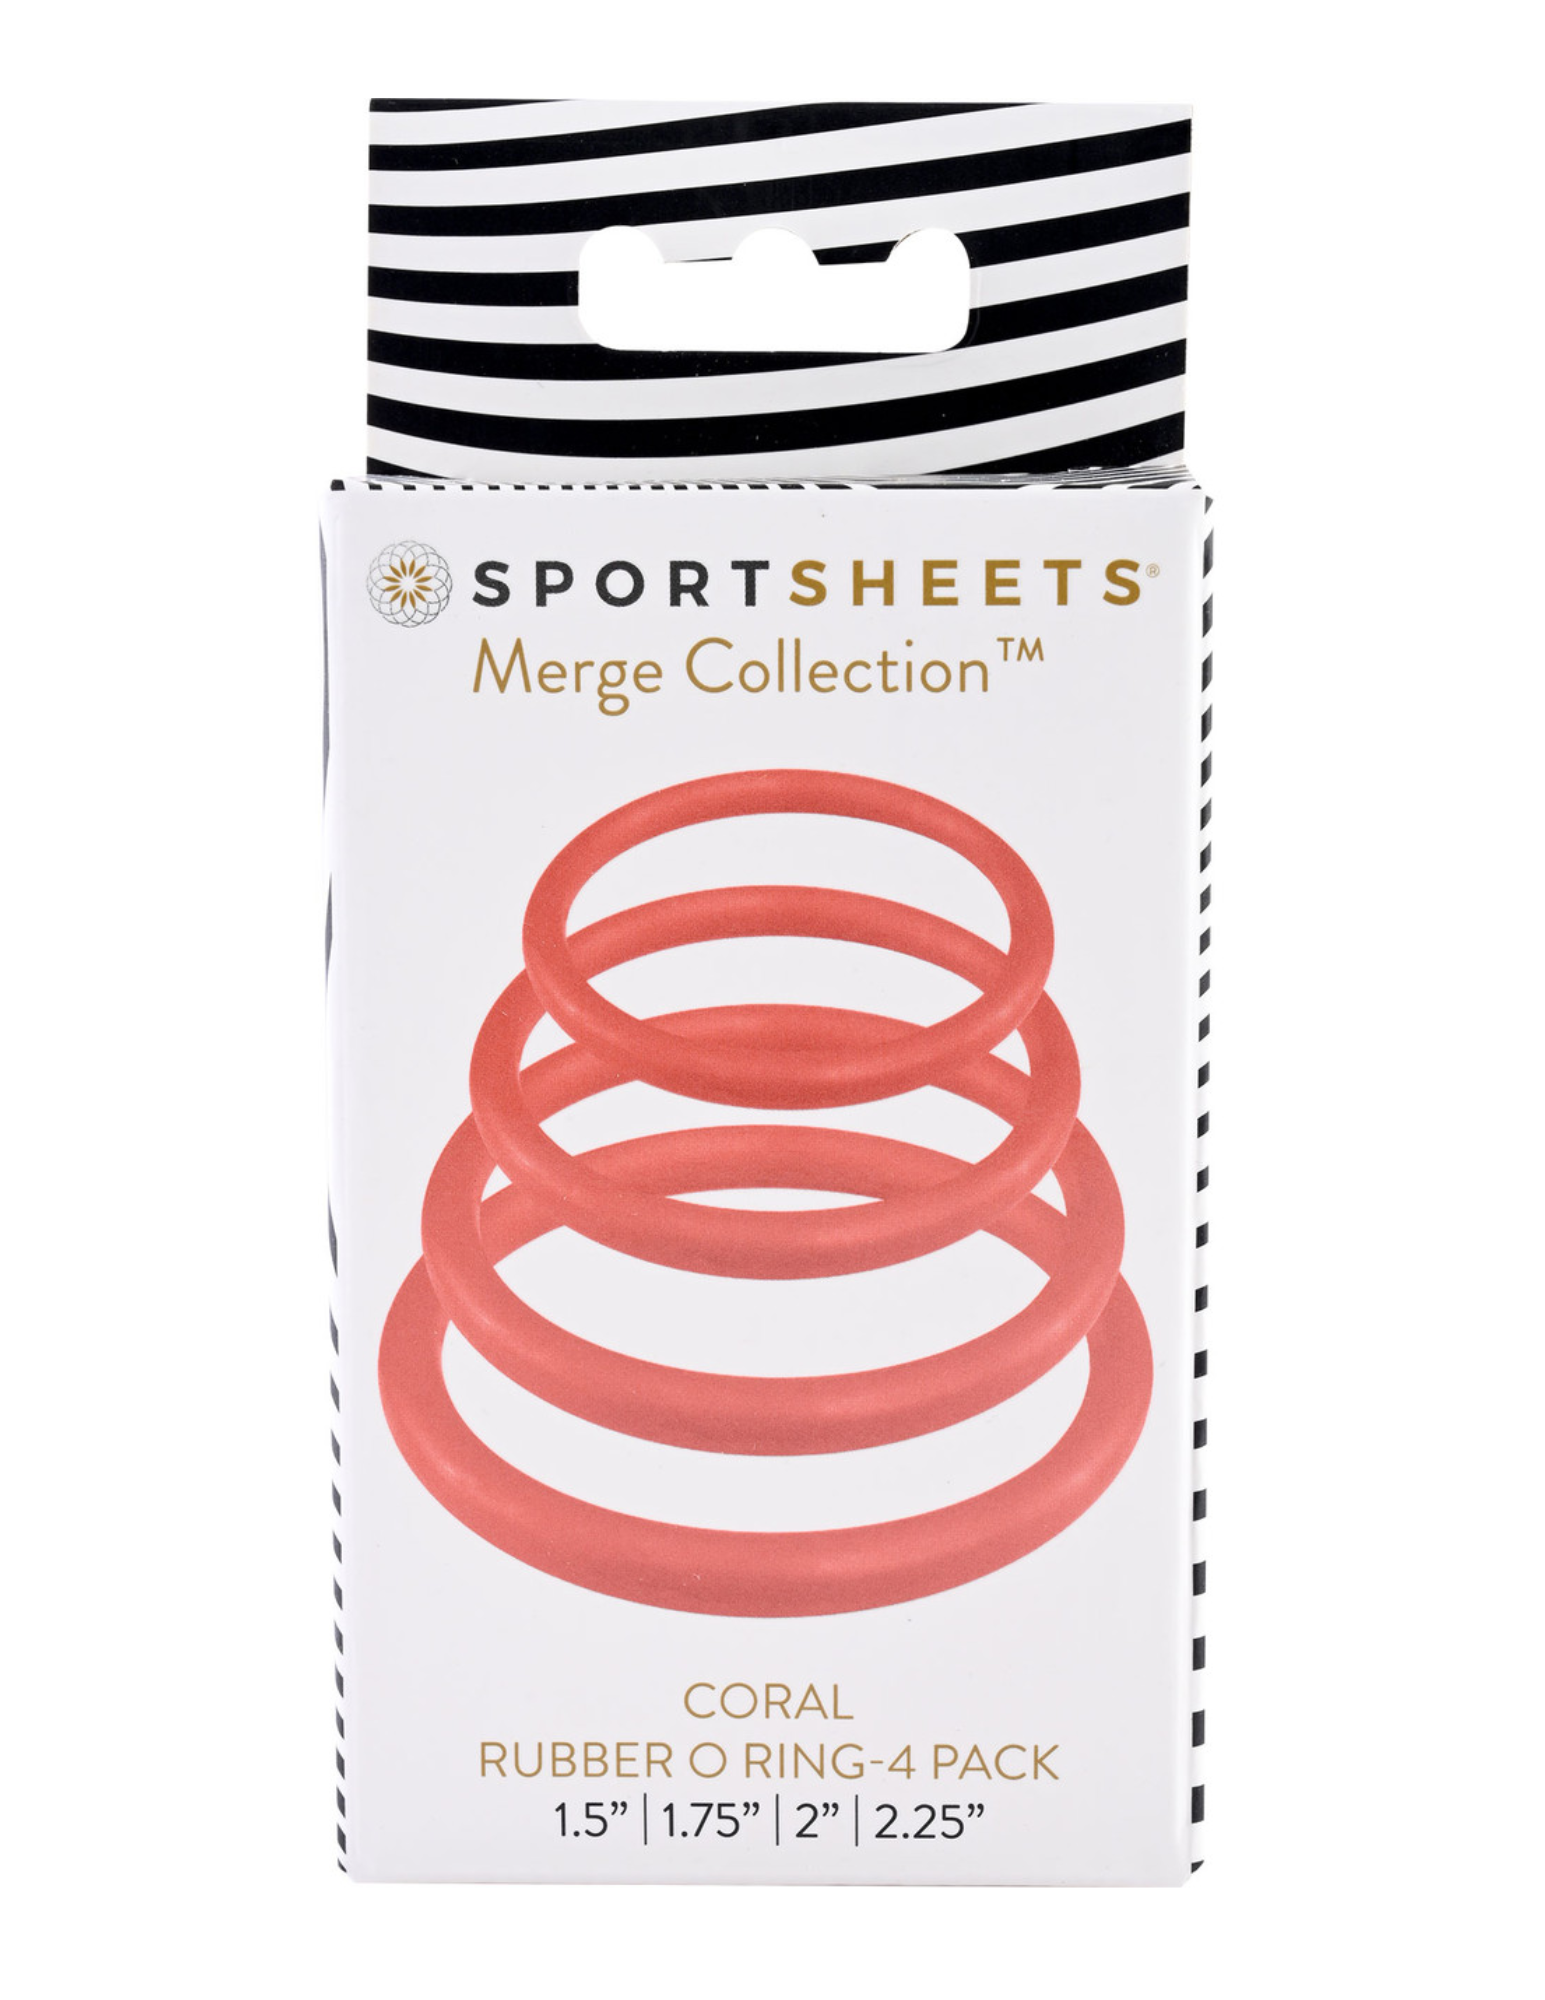 Photo of the box for the Merge Collection Rubber O-Ring (coral) from Sportsheets.